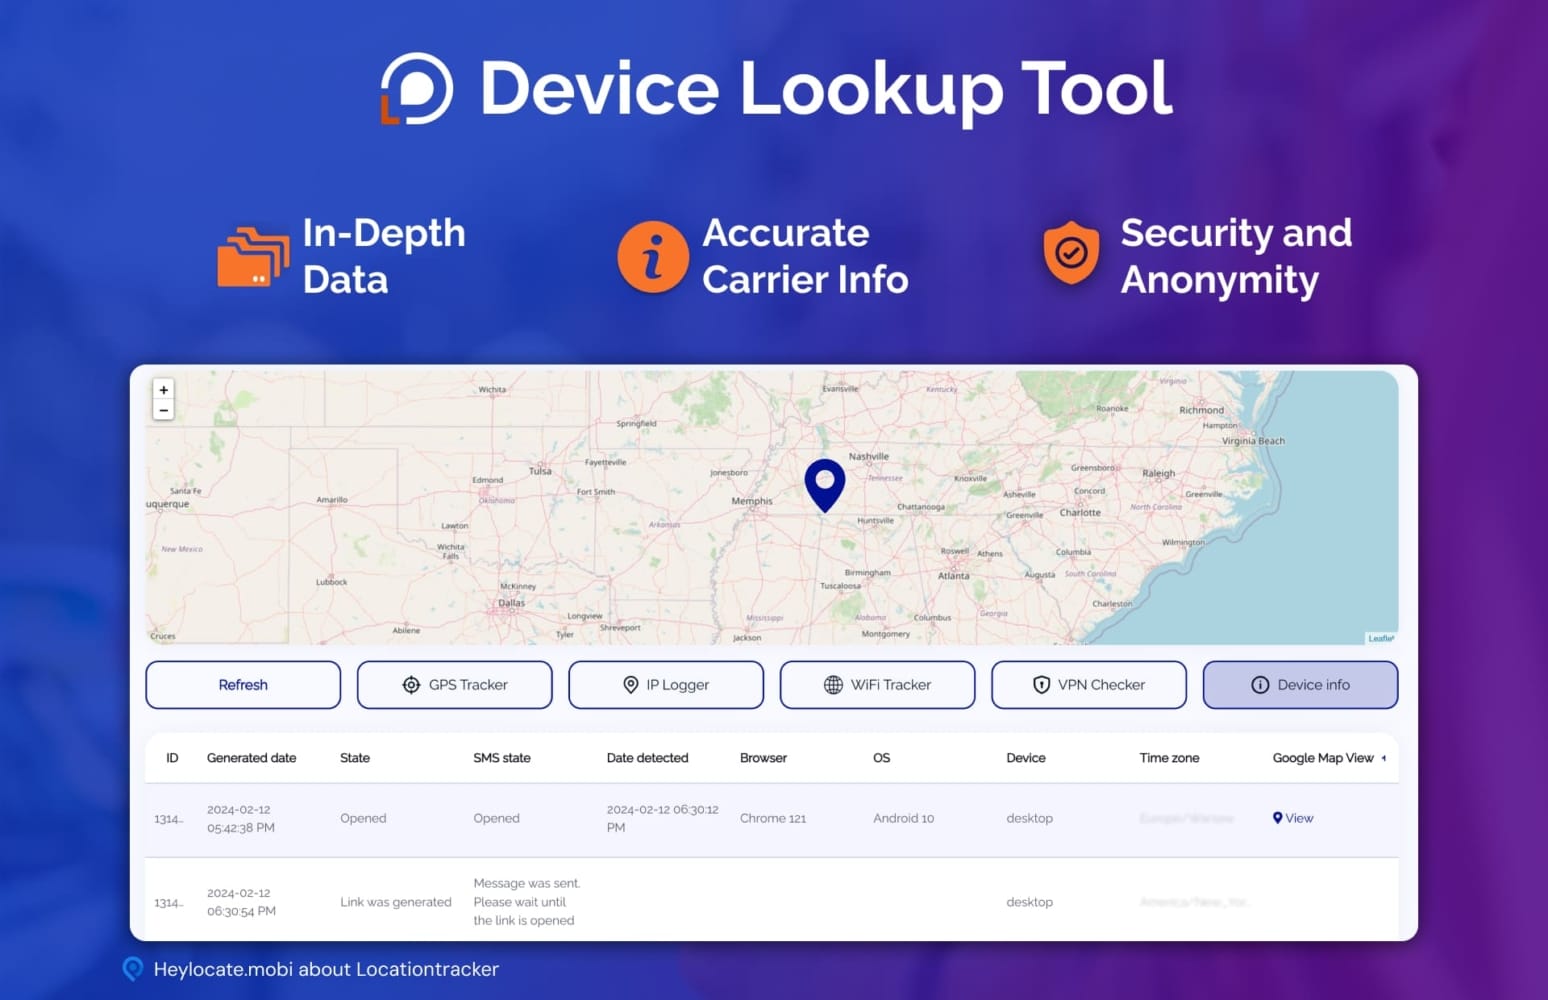 A visual of the "Device Lookup Tool" interface featuring a map with a location marker. The tracking list includes ID numbers, generated dates, states, SMS states, and detected information like browser type, operating system, and device, and view on Google map.